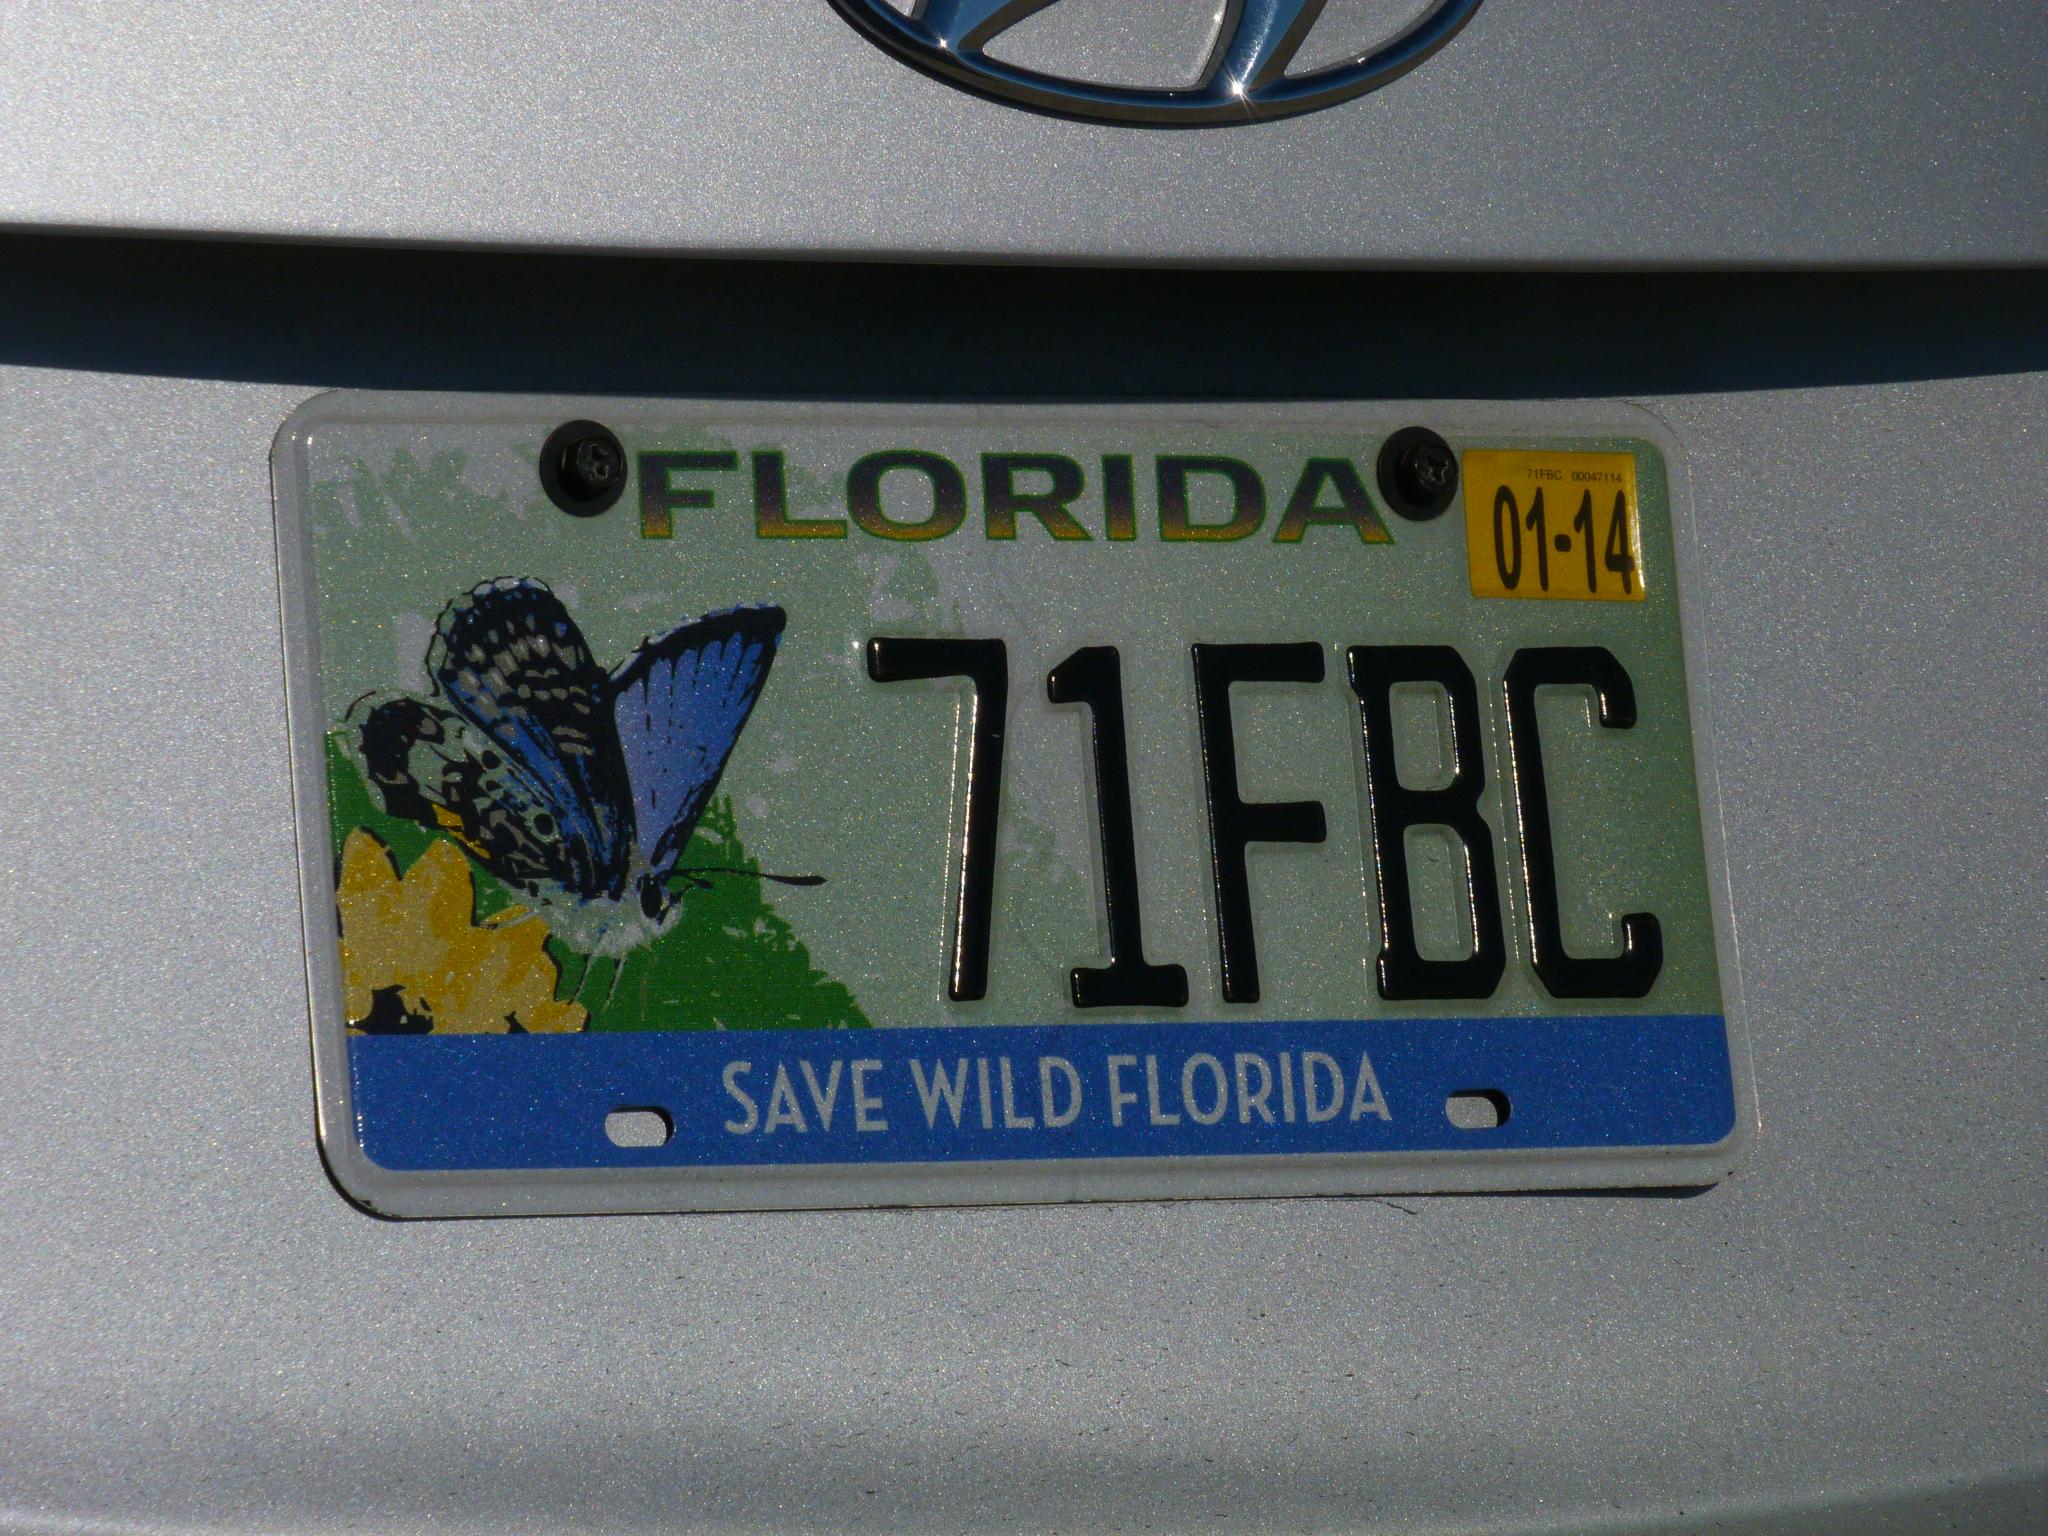 the blue erfly is on a license plate